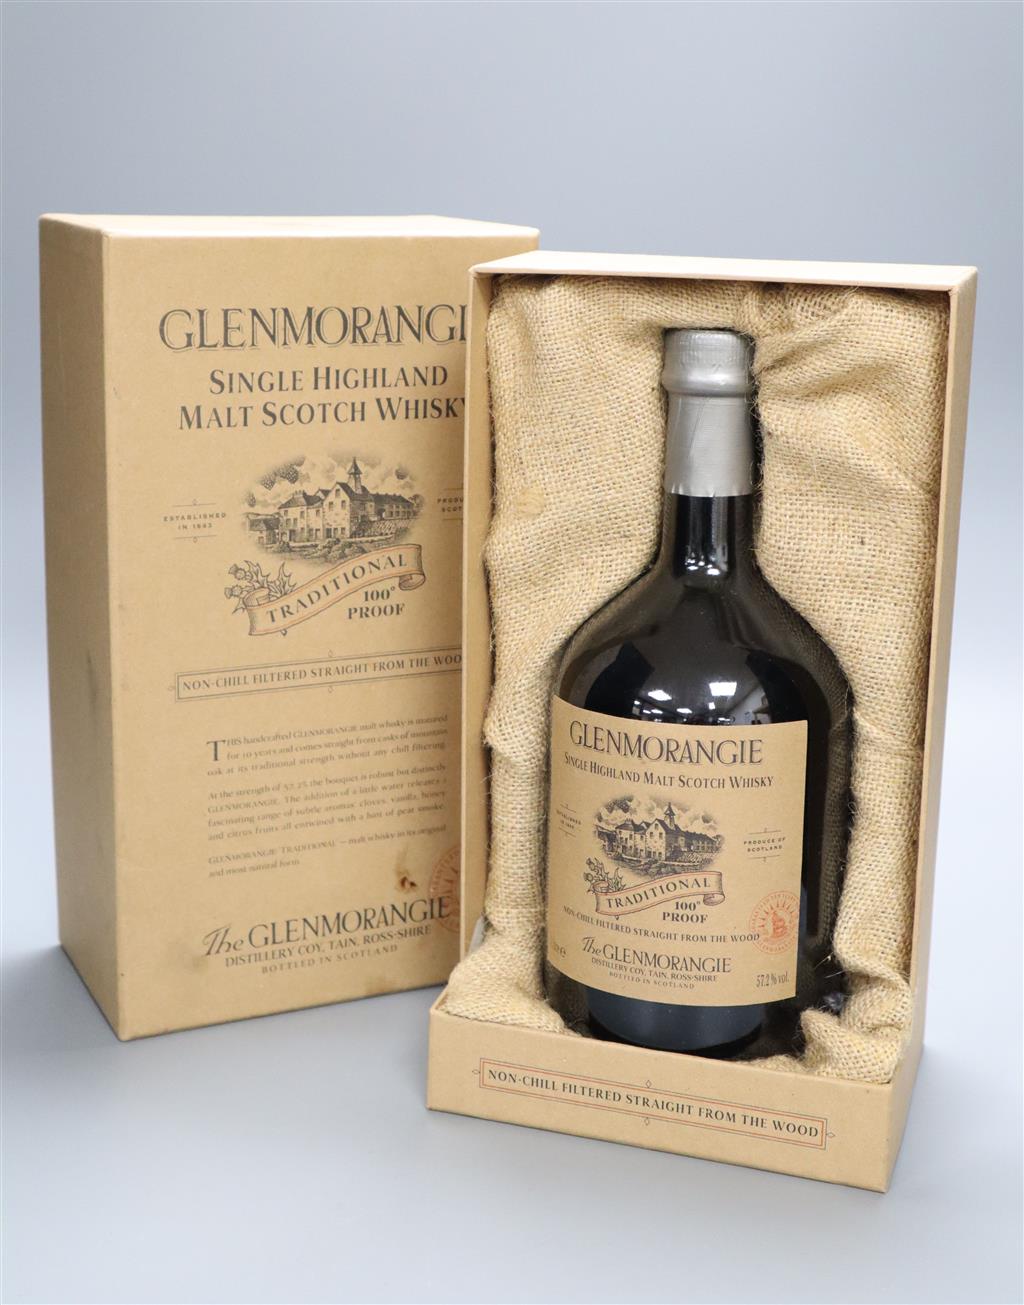 A bottle of Glenmorangie 10 years old Traditional 100% proof Single Highland Malt Whisky, 1lt, boxed